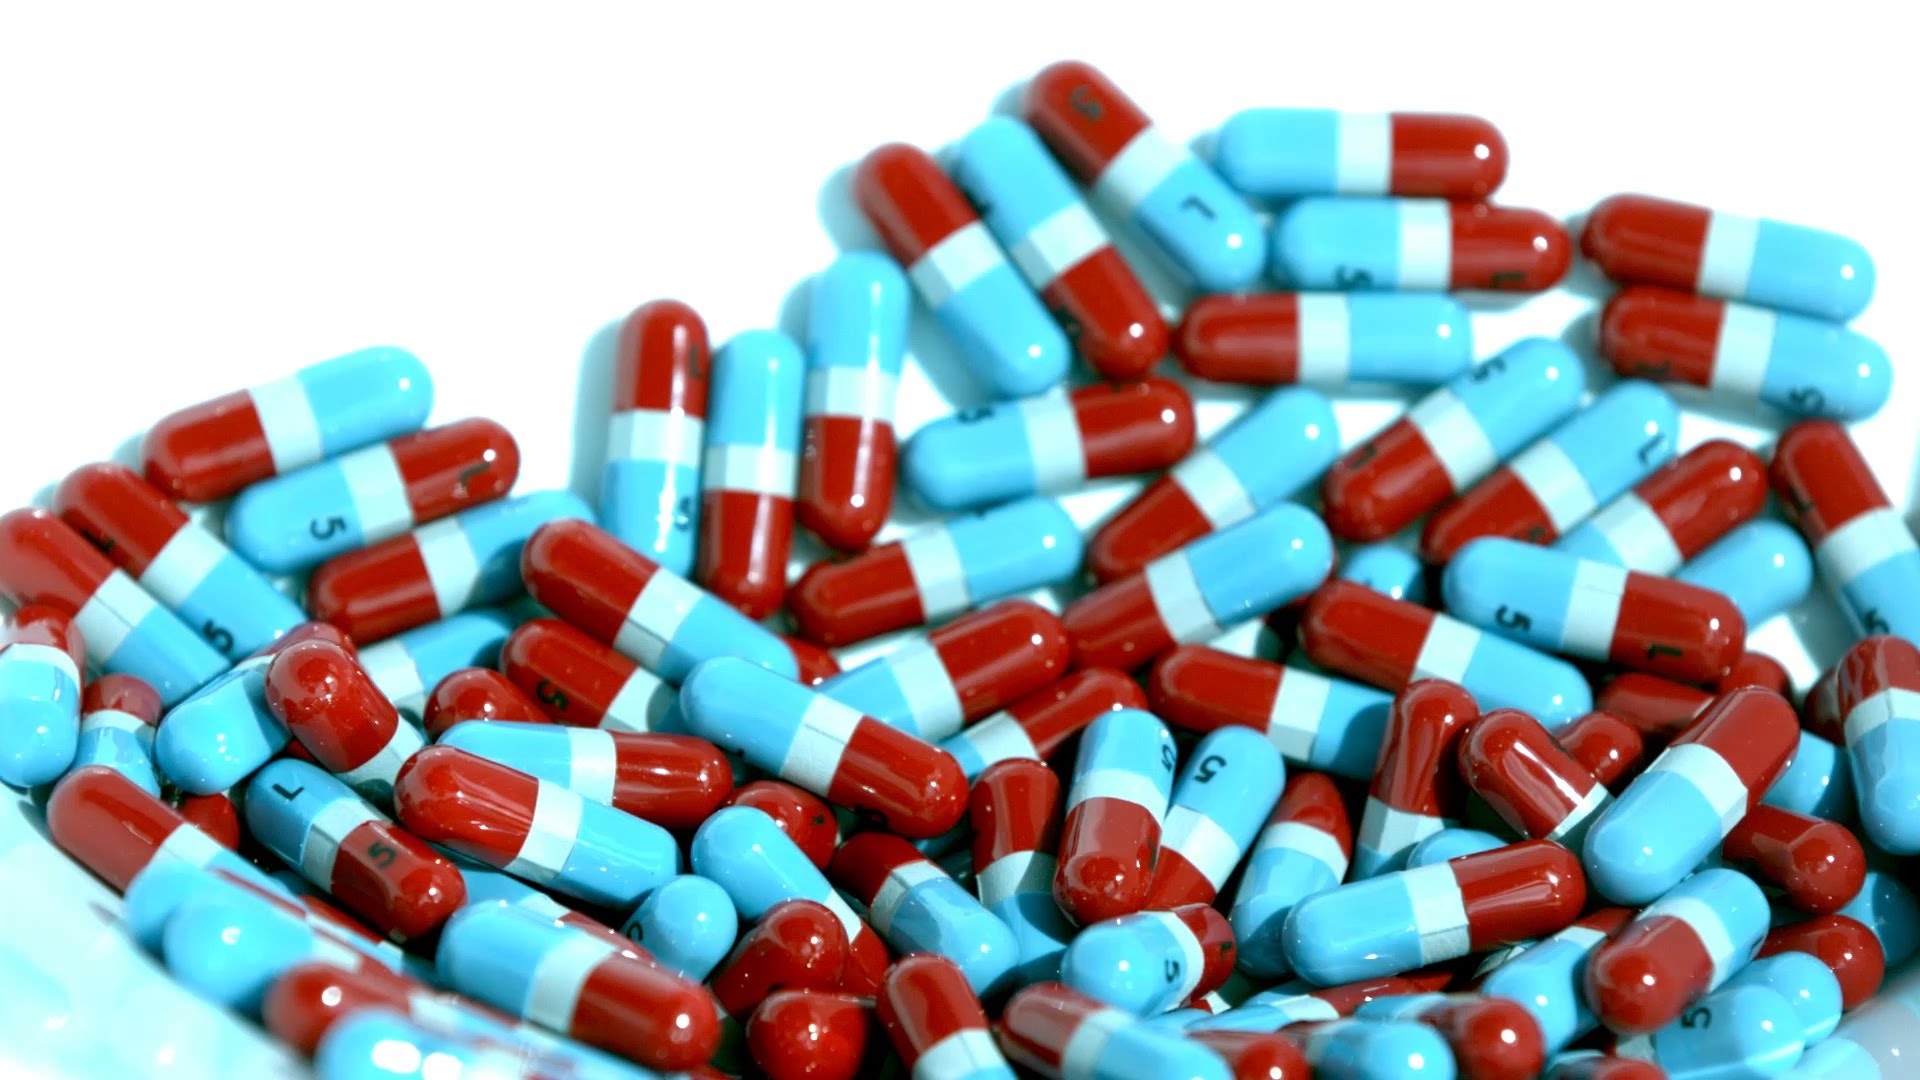 Free Slow Motion Footage: Pile of Pills - YouTube